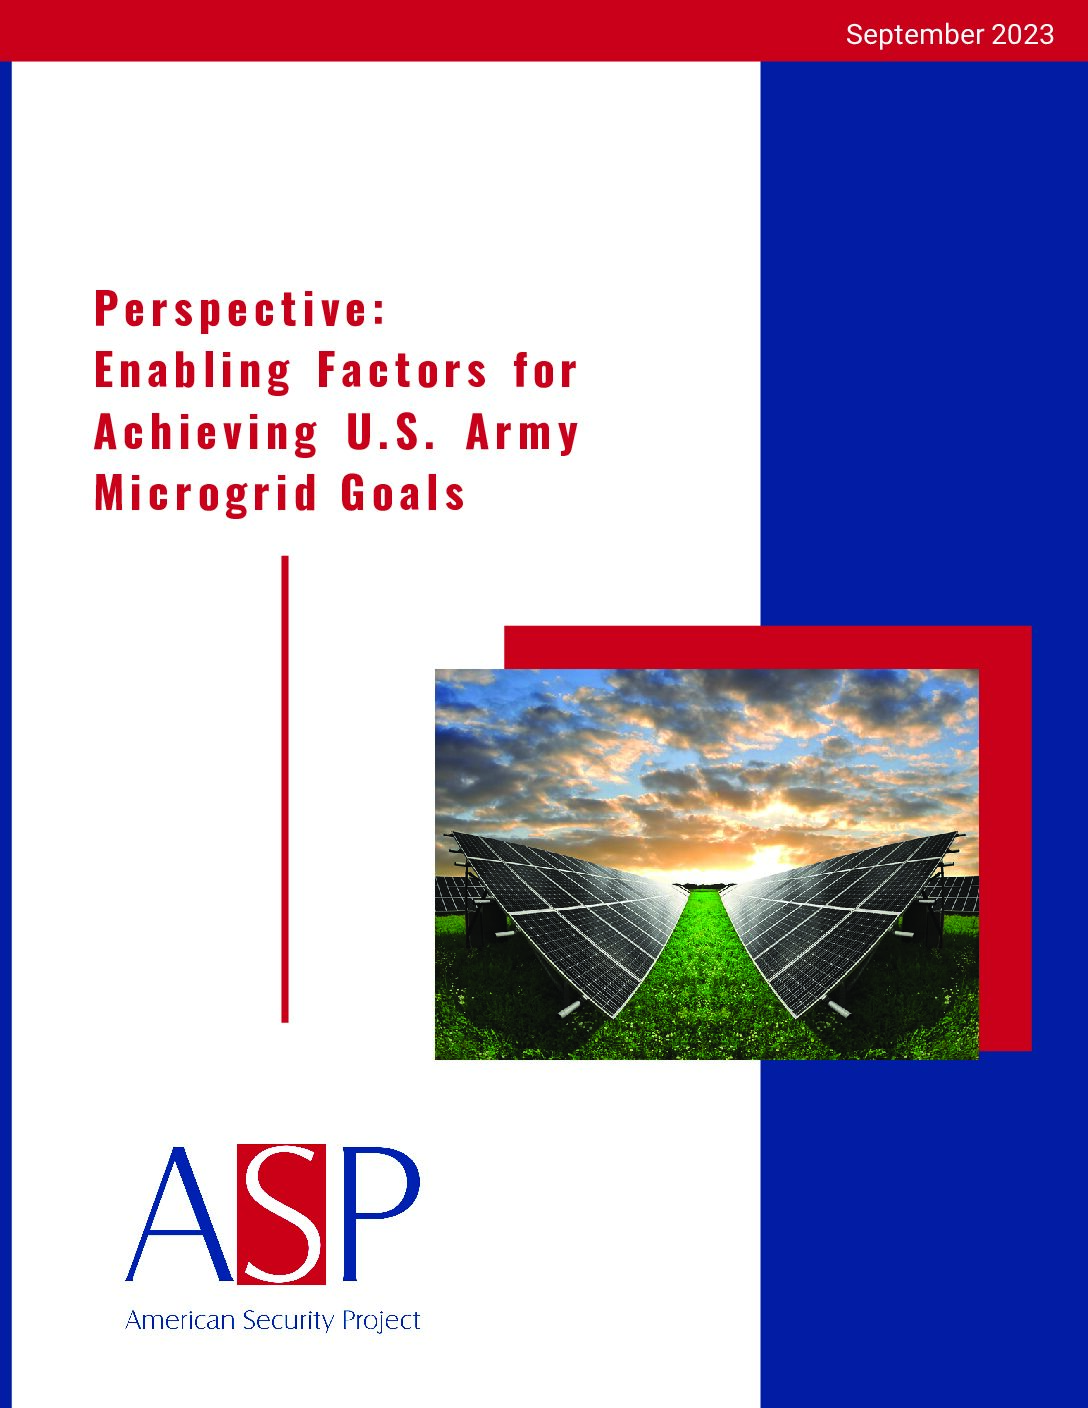 Perspective – Enabling Factors for Achieving U.S. Army Microgrid Goals